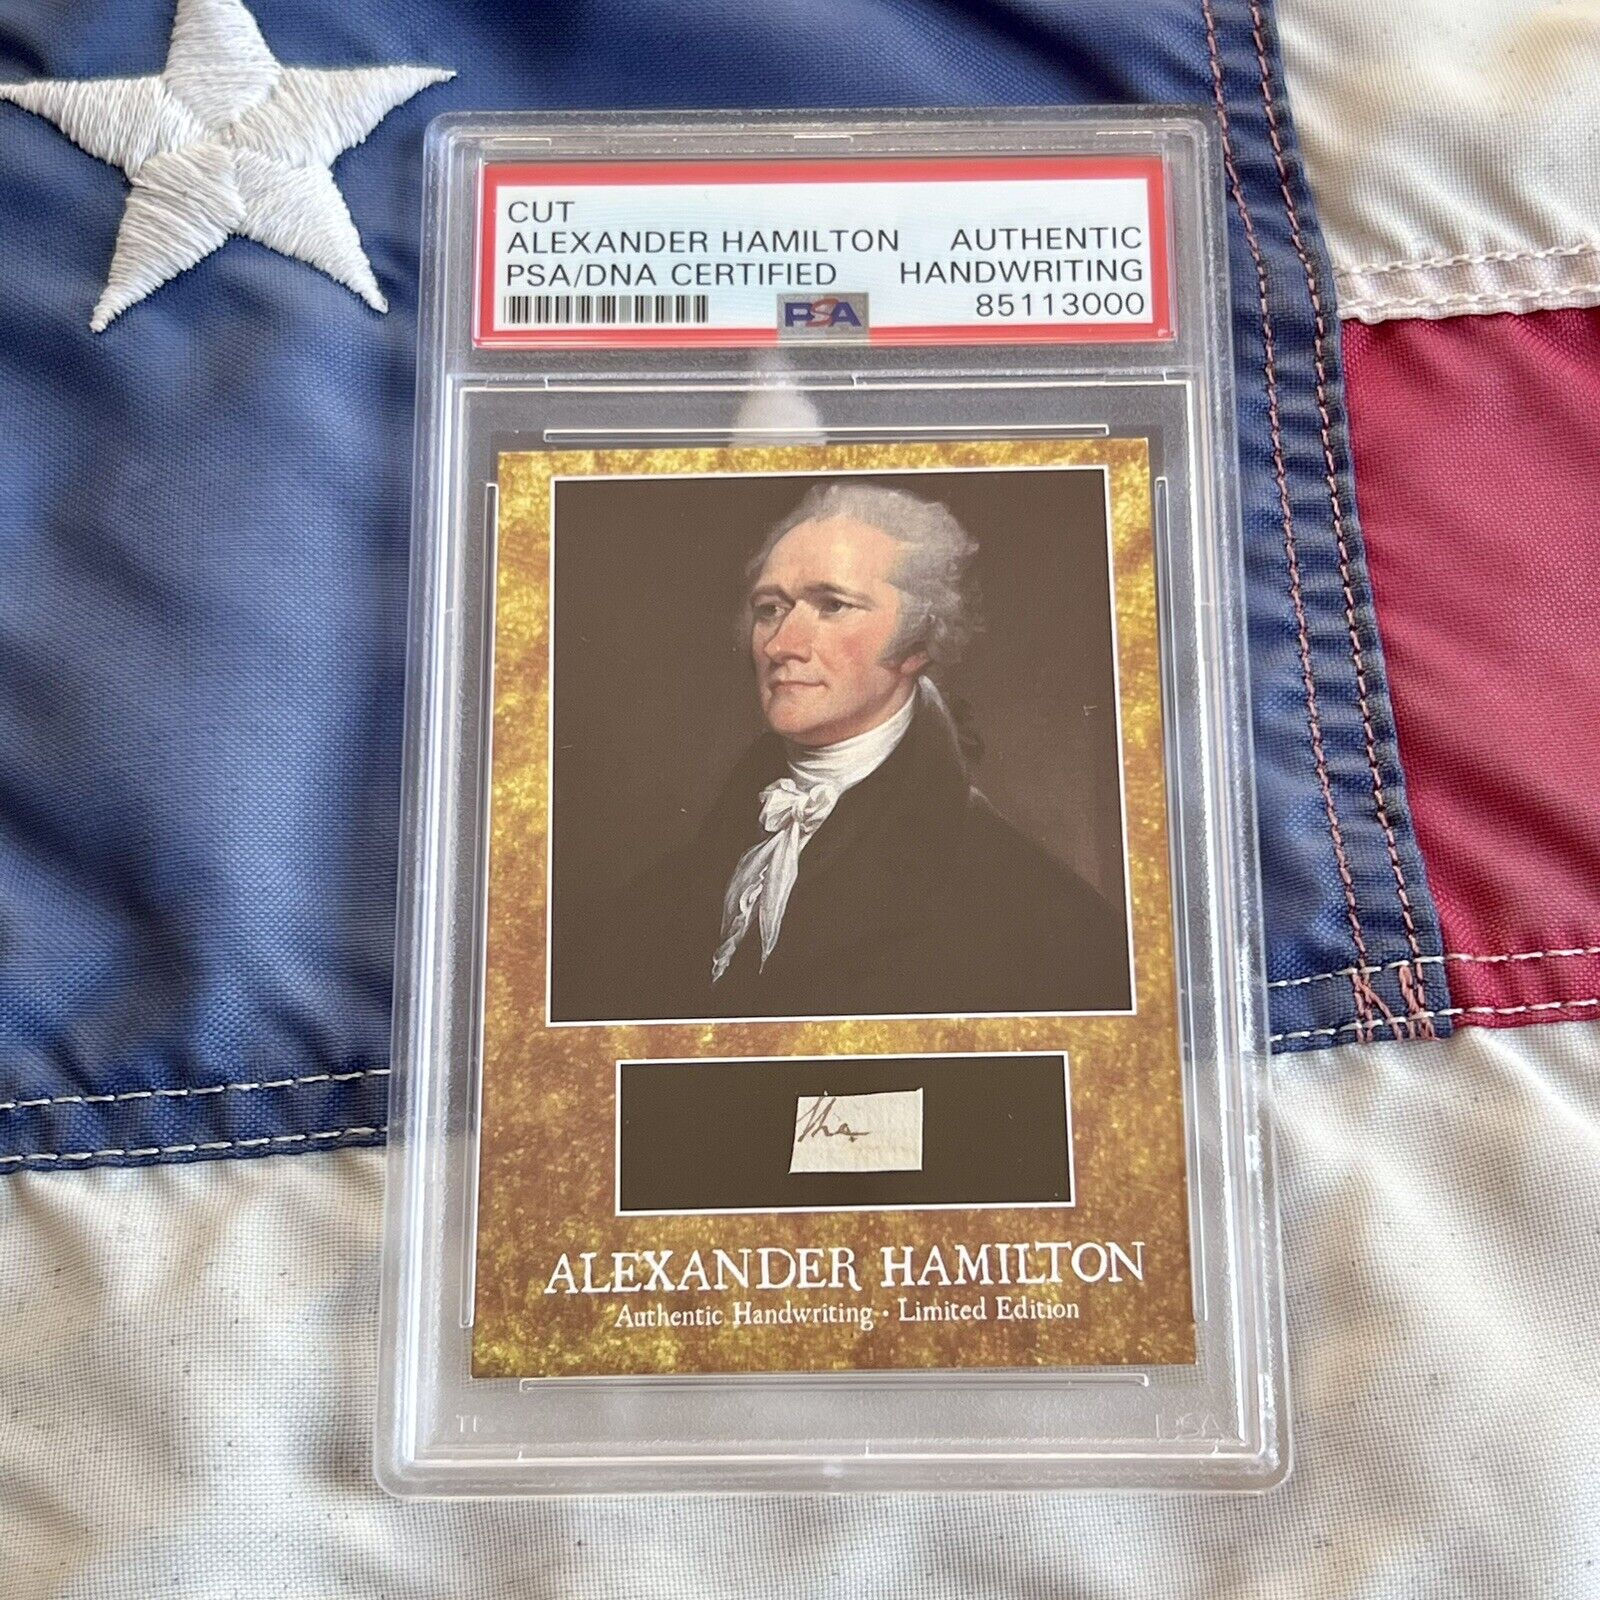 Alexander Hamilton Handwritten Word Removed From a PSA Autograph Signed Letter